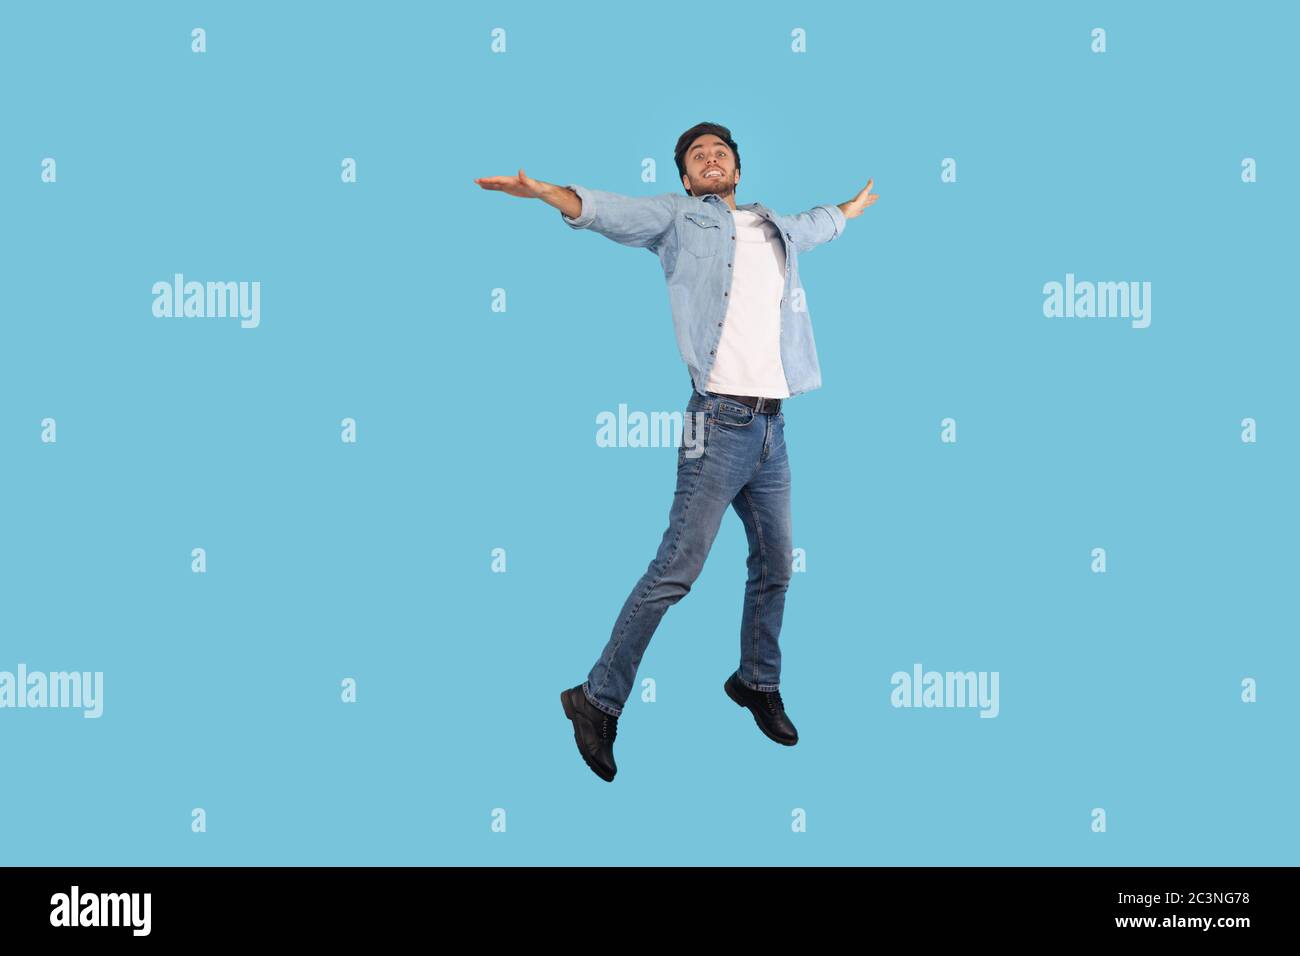 Full length, man in jeans outfit flying up in air, jumping high on trampoline with joyful expression, feeling freedom, energy, full of enthusiasm. ind Stock Photo